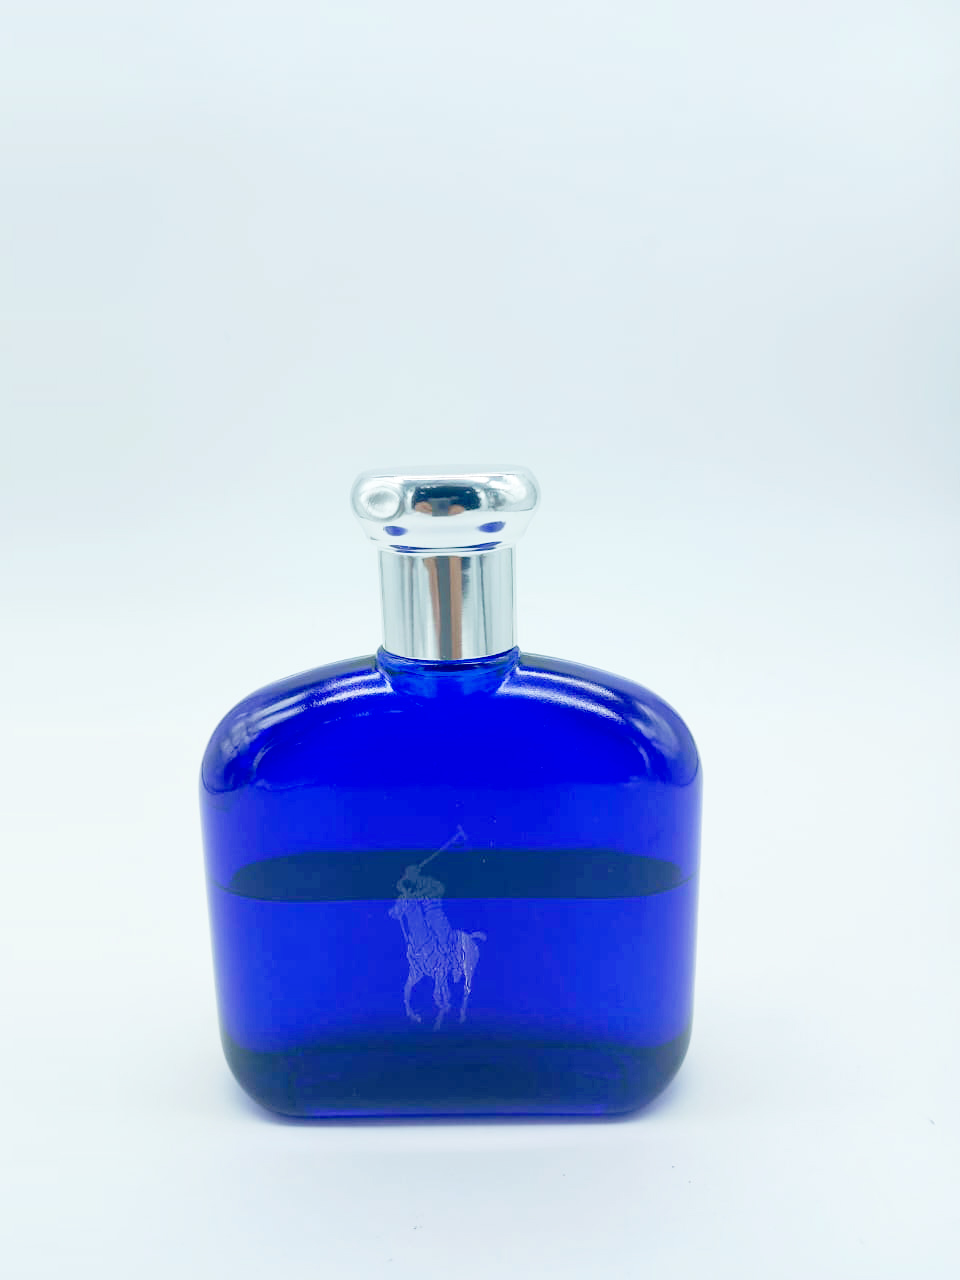 Polo Blue by Ralph Lauren for Men Aftershave